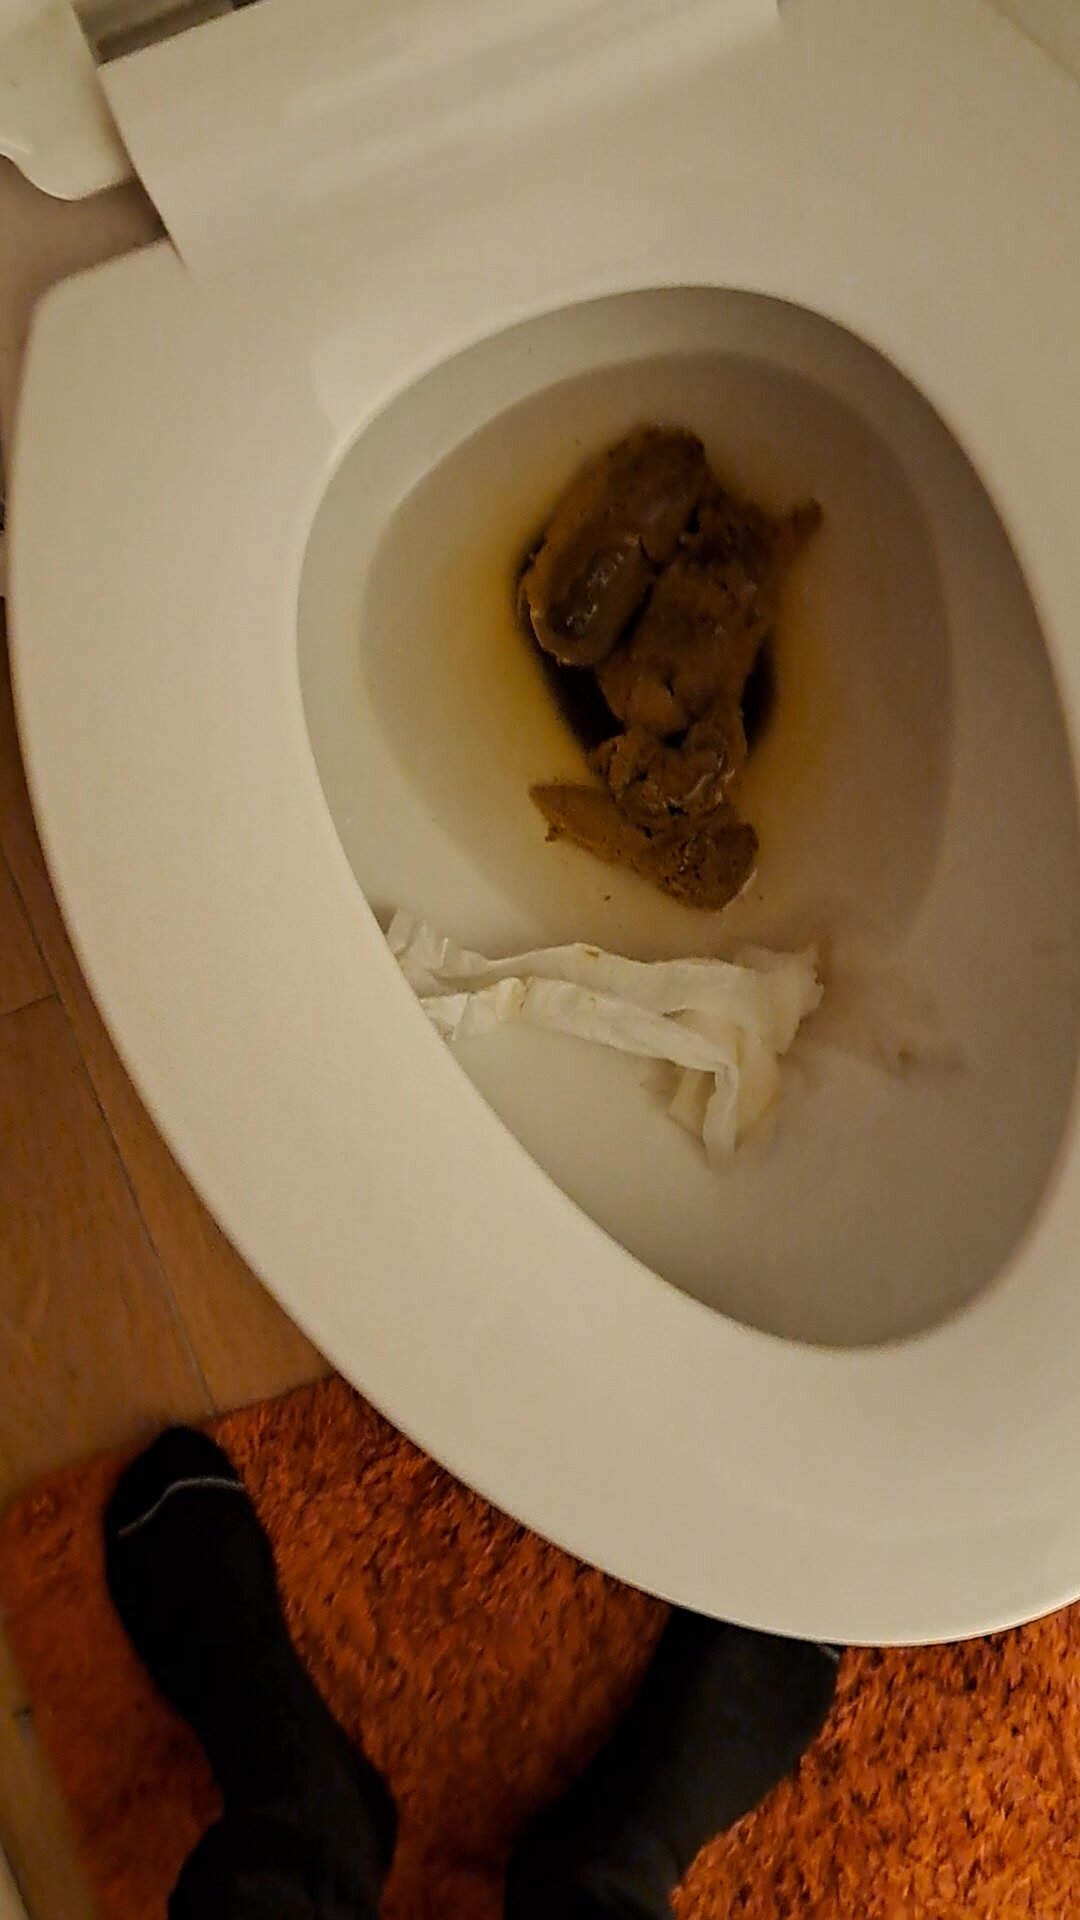 Solid poop from behind flush